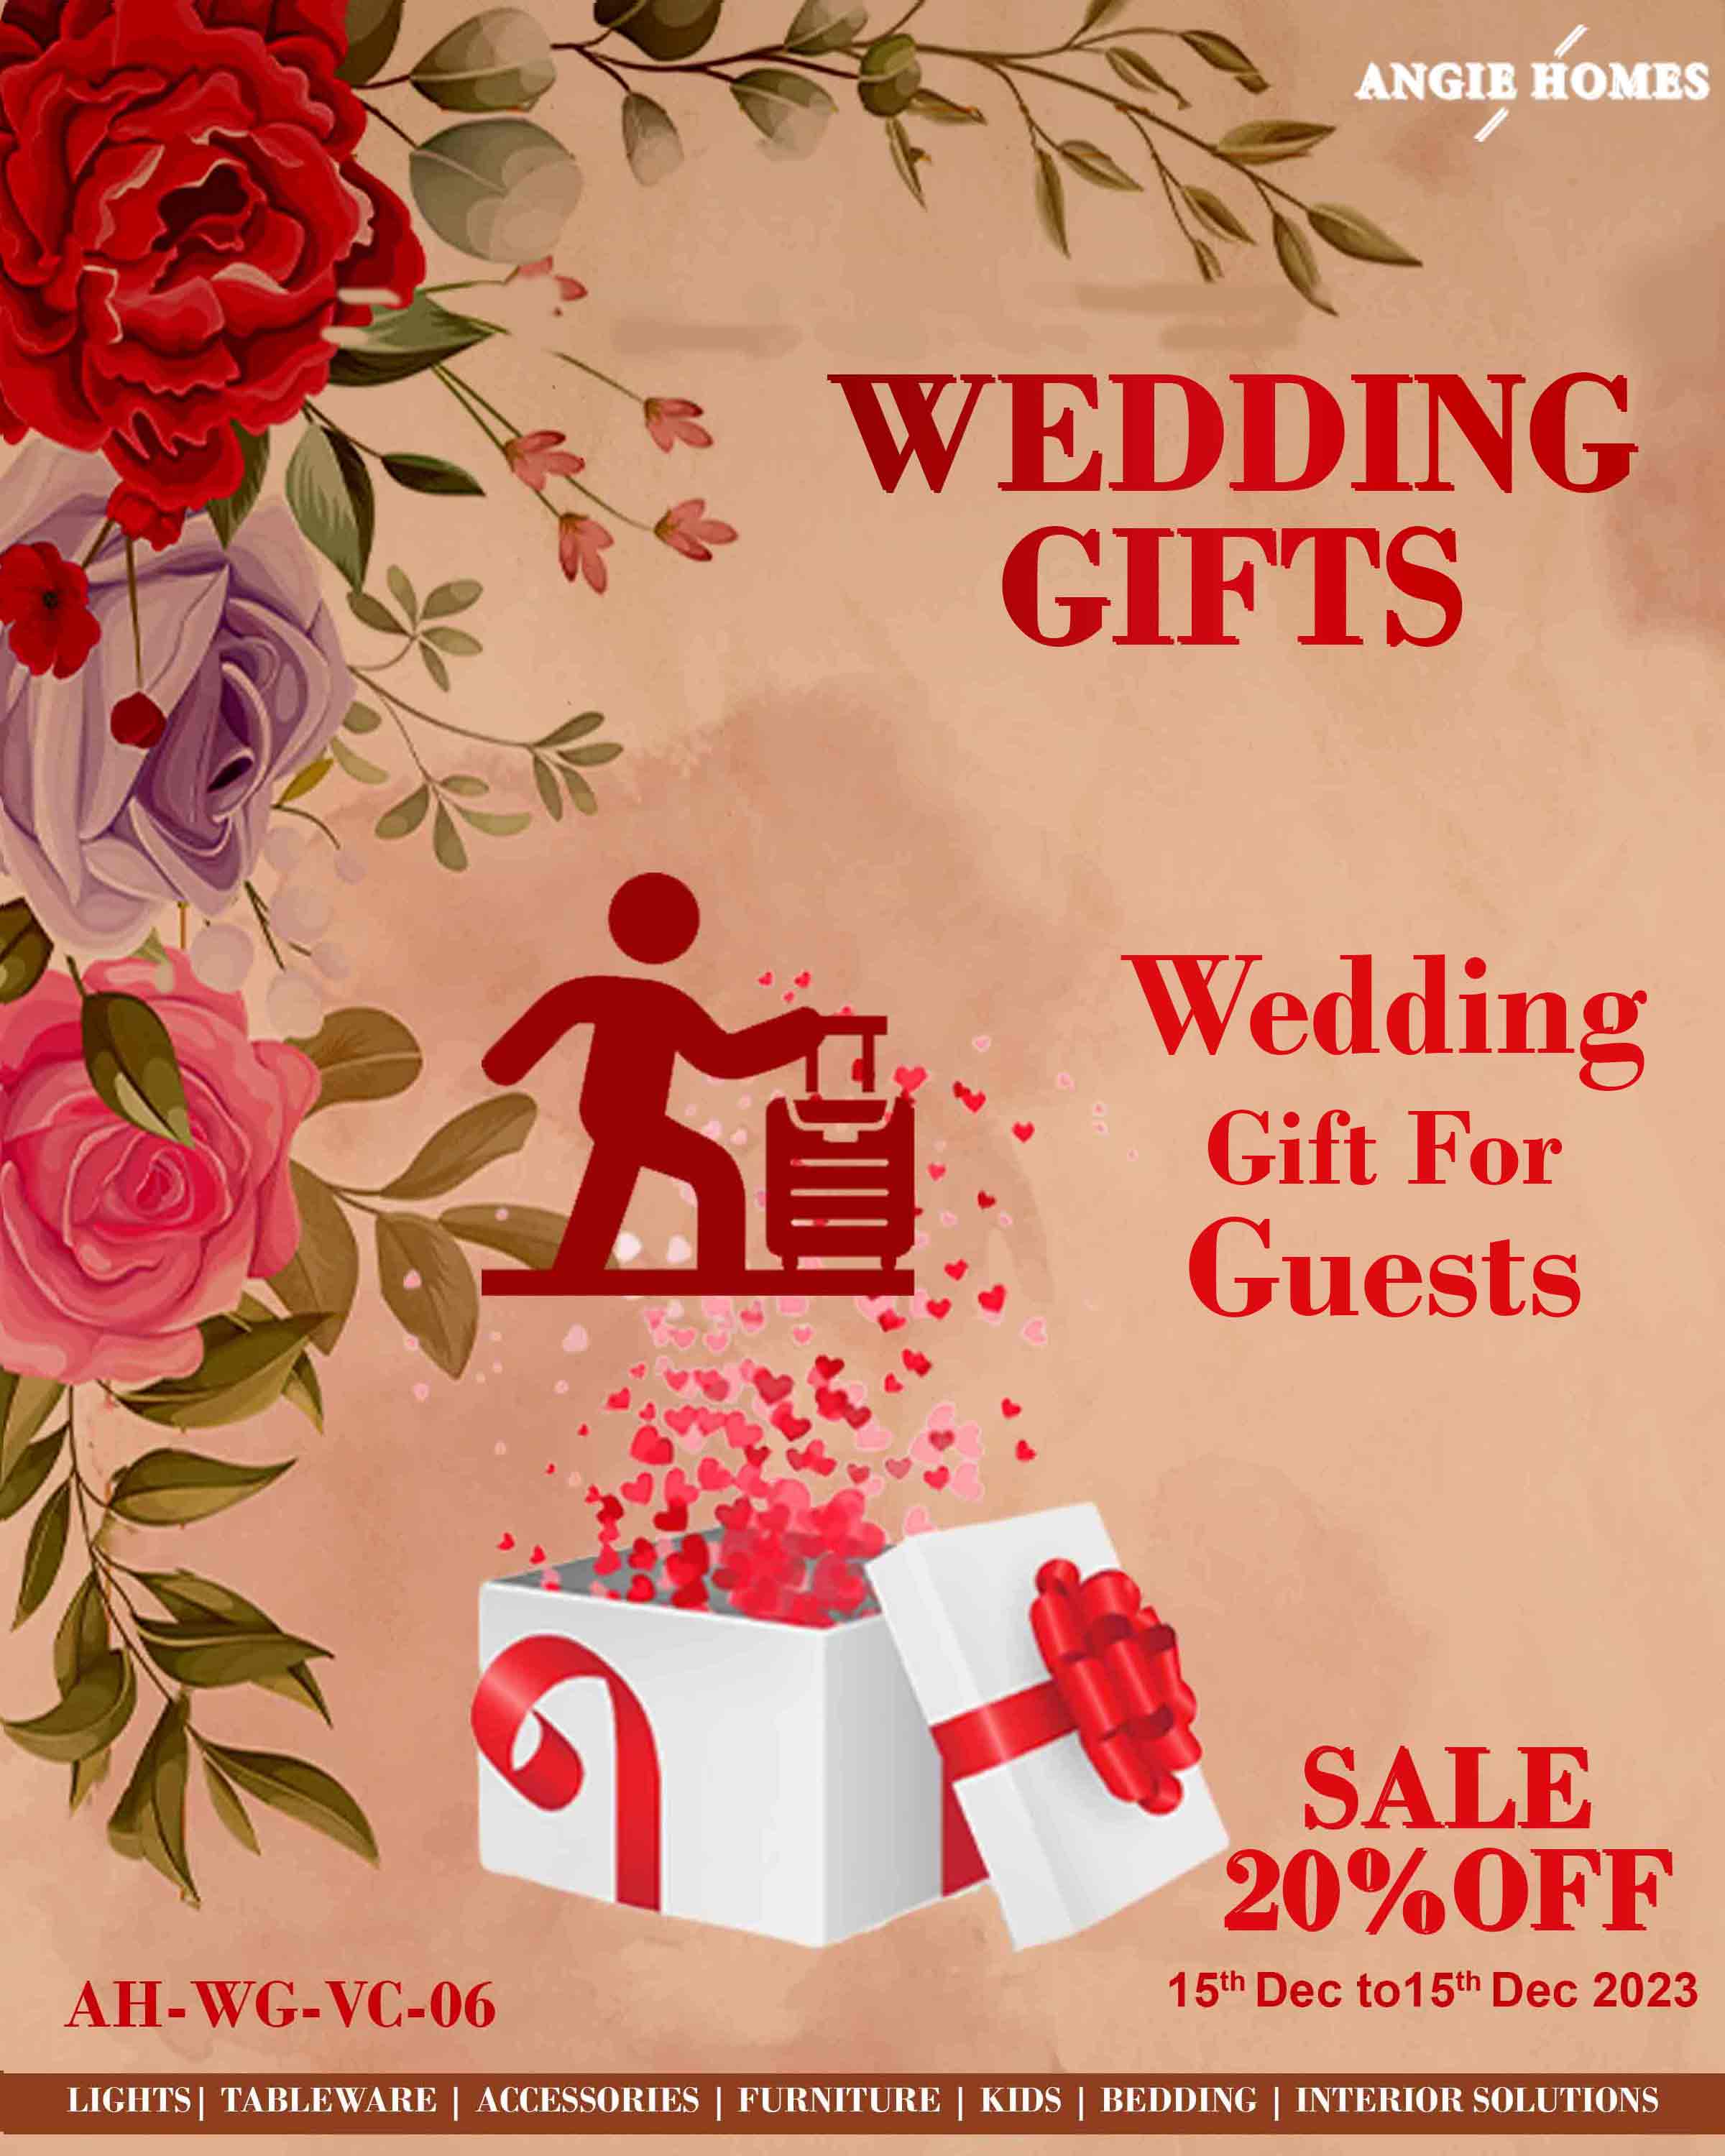 WEDDING GIFTS FOR GUESTS | MARRIAGE GIFT VOUCHER | RETURN GIFTTING CARD FOR GUESTS ANGIE HOMES